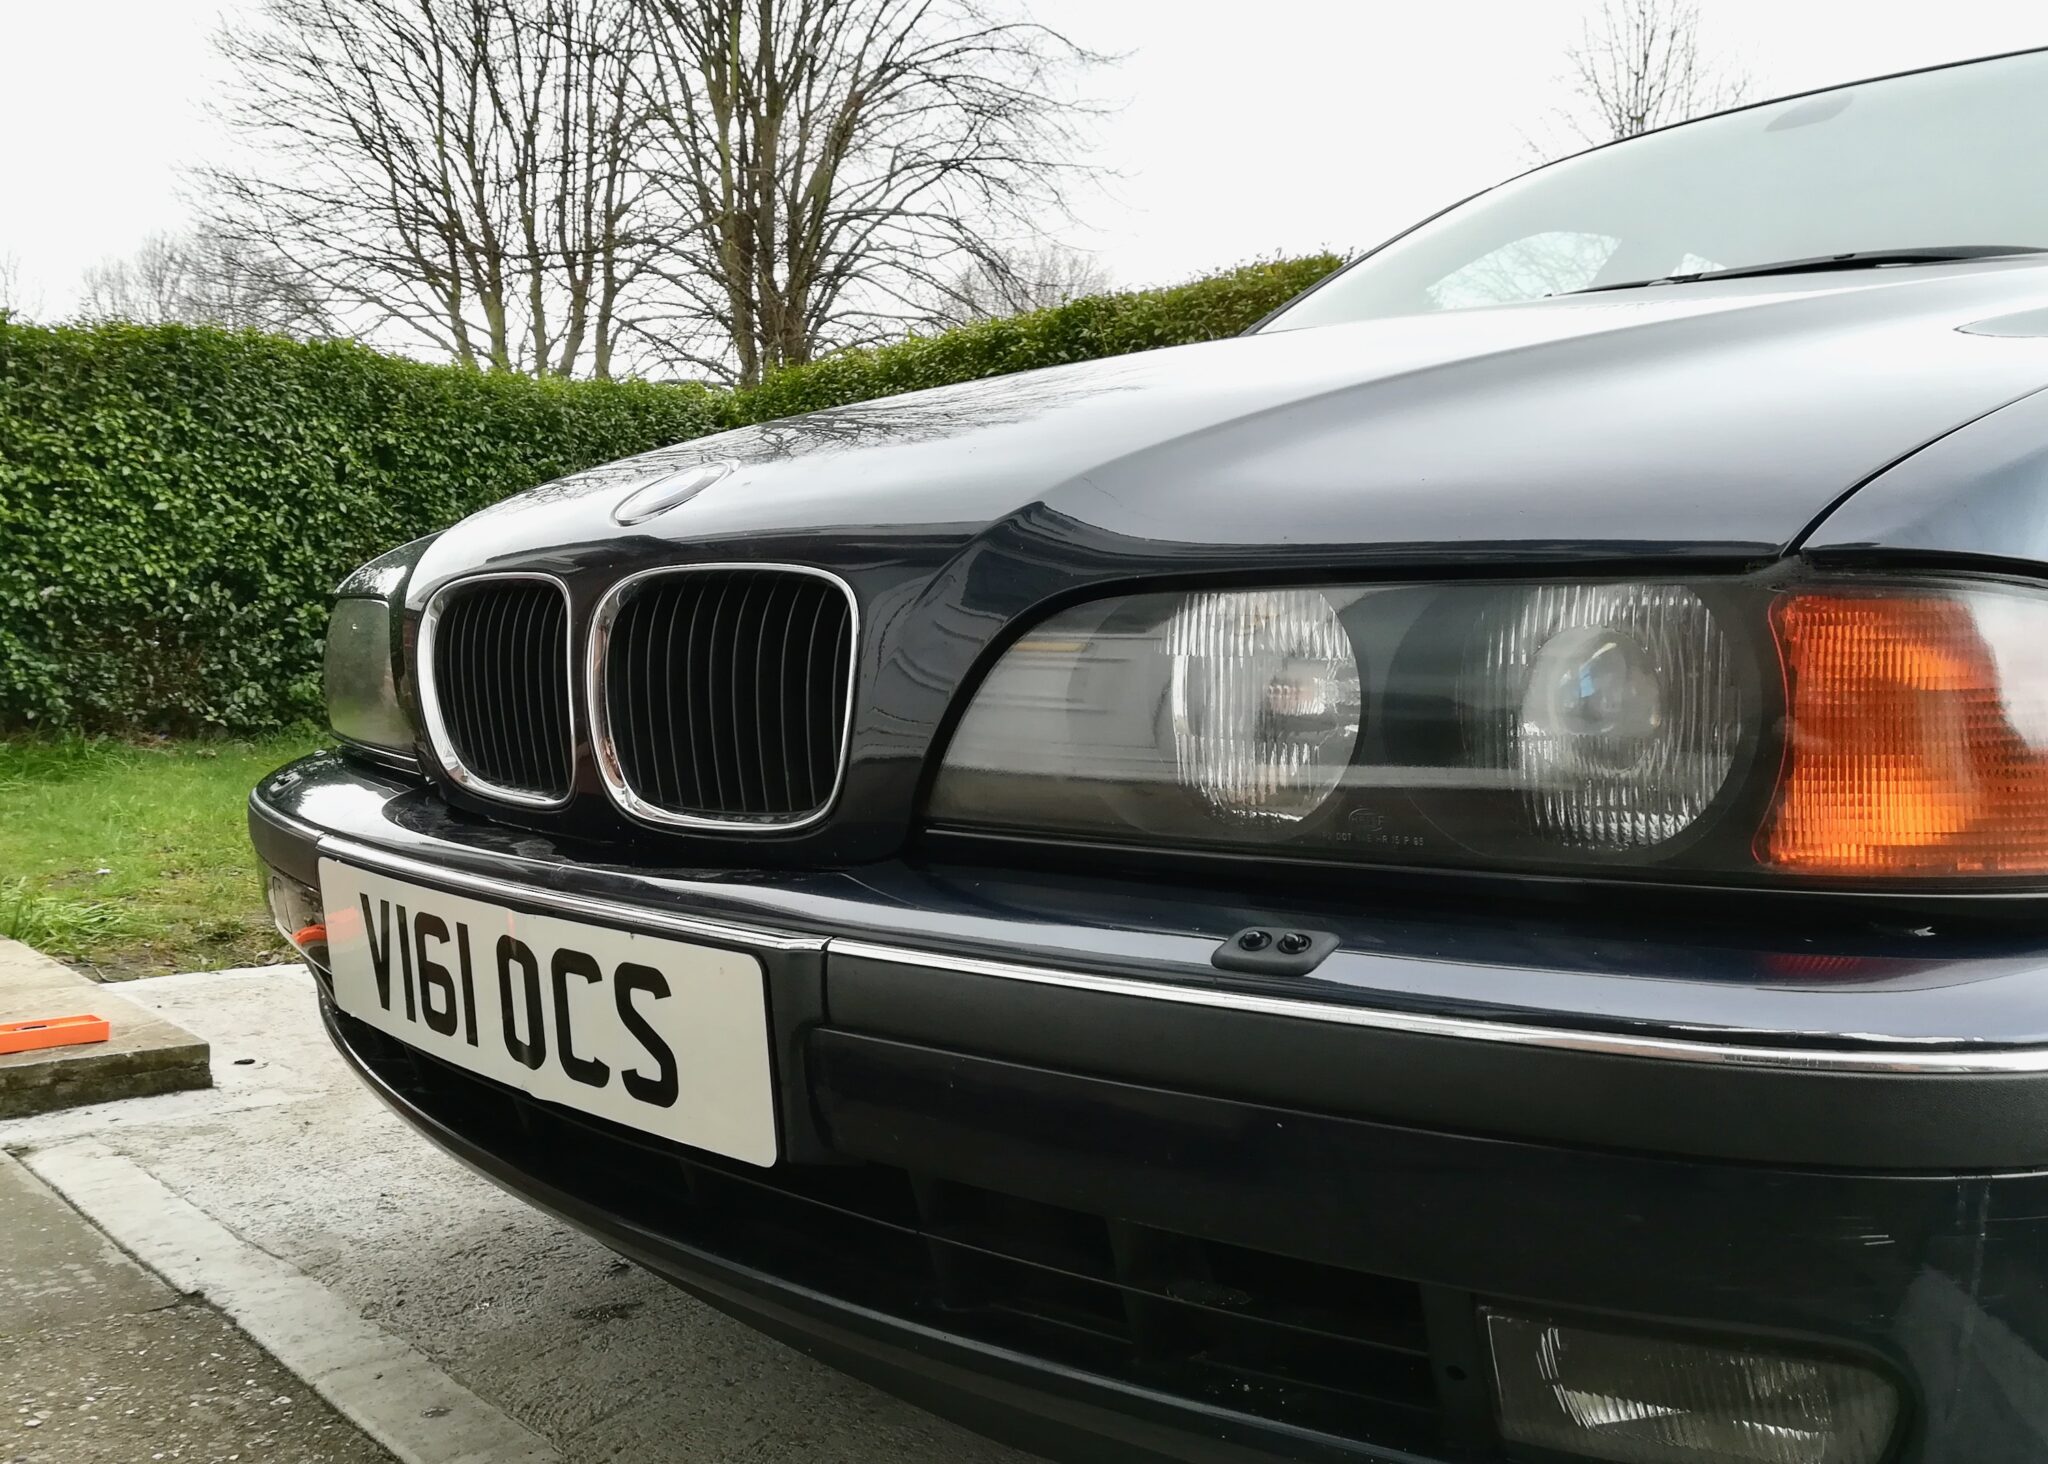 BMW, E39, BMW 528i, project car, E39 Touring, Project Improvvisatore, N2G, Not 2 Grand, Not2Grand, not2grand.co.uk